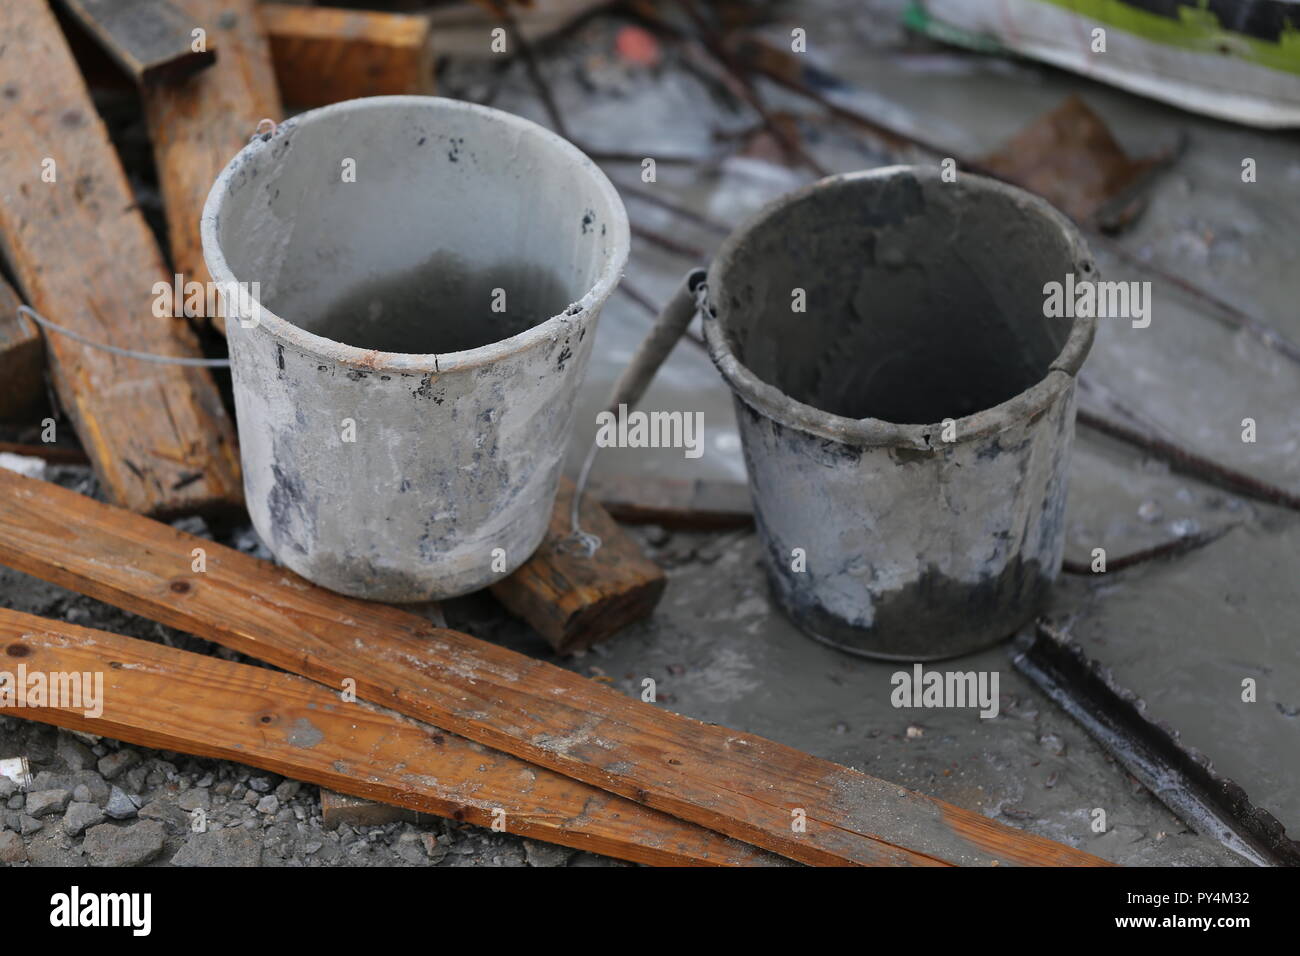 Two Buckets In Construction Site.  Two empty buckets near dirty used planks. White bucket and gray bucket in a messy construction site. Stock Photo